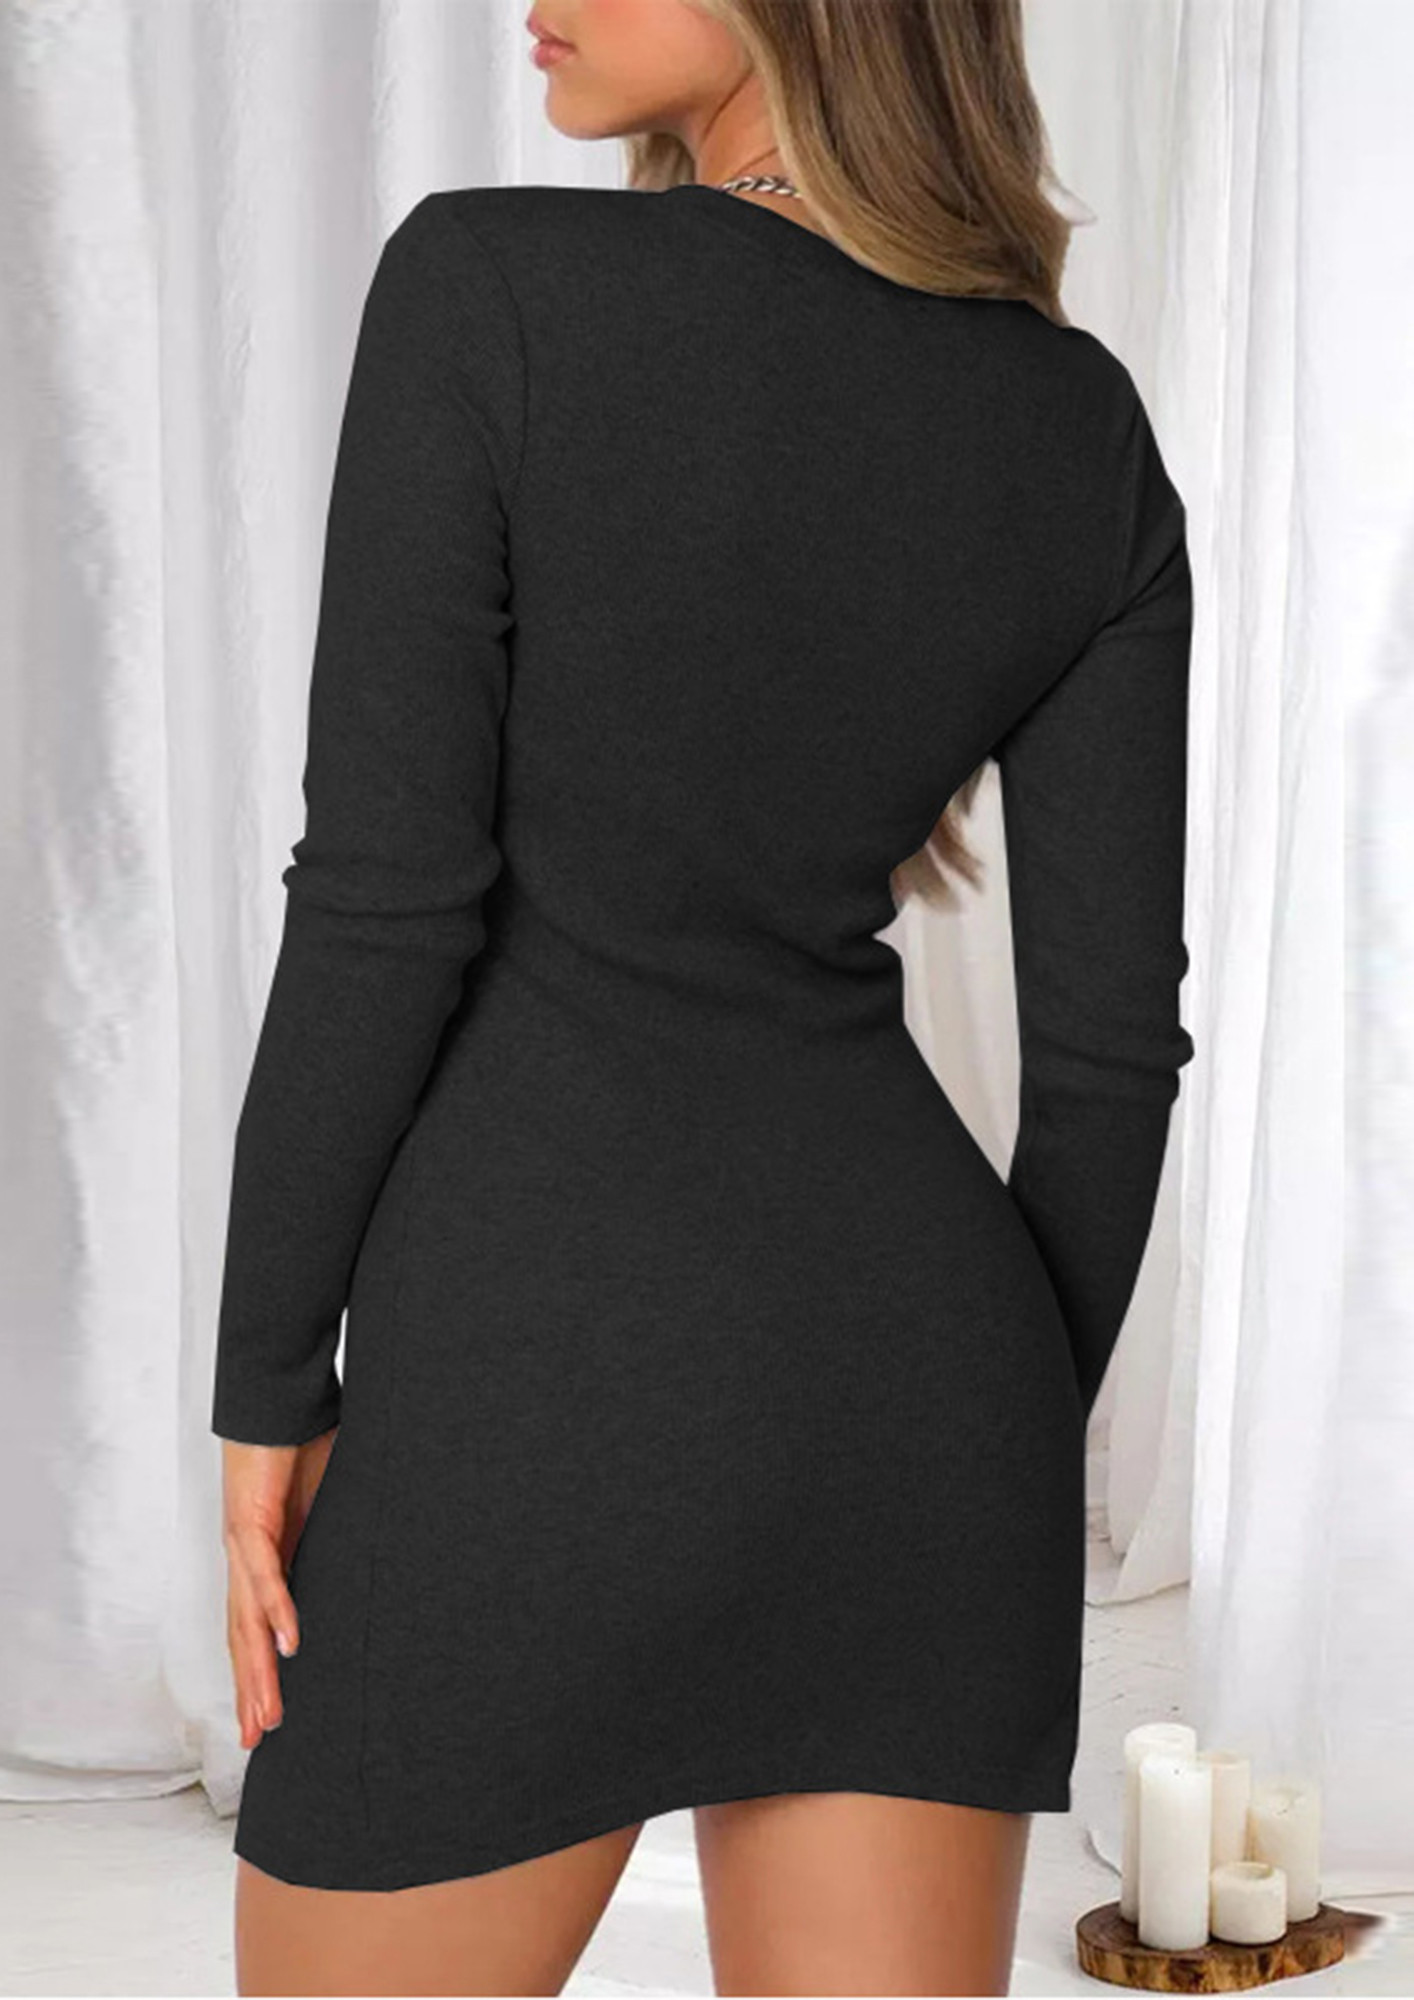 Women Off The Shoulder Short Sleeve Solid Color Casual Party Midi Dress  Black Business Dress for Women Black Dresses for Women Funeral - Walmart.com